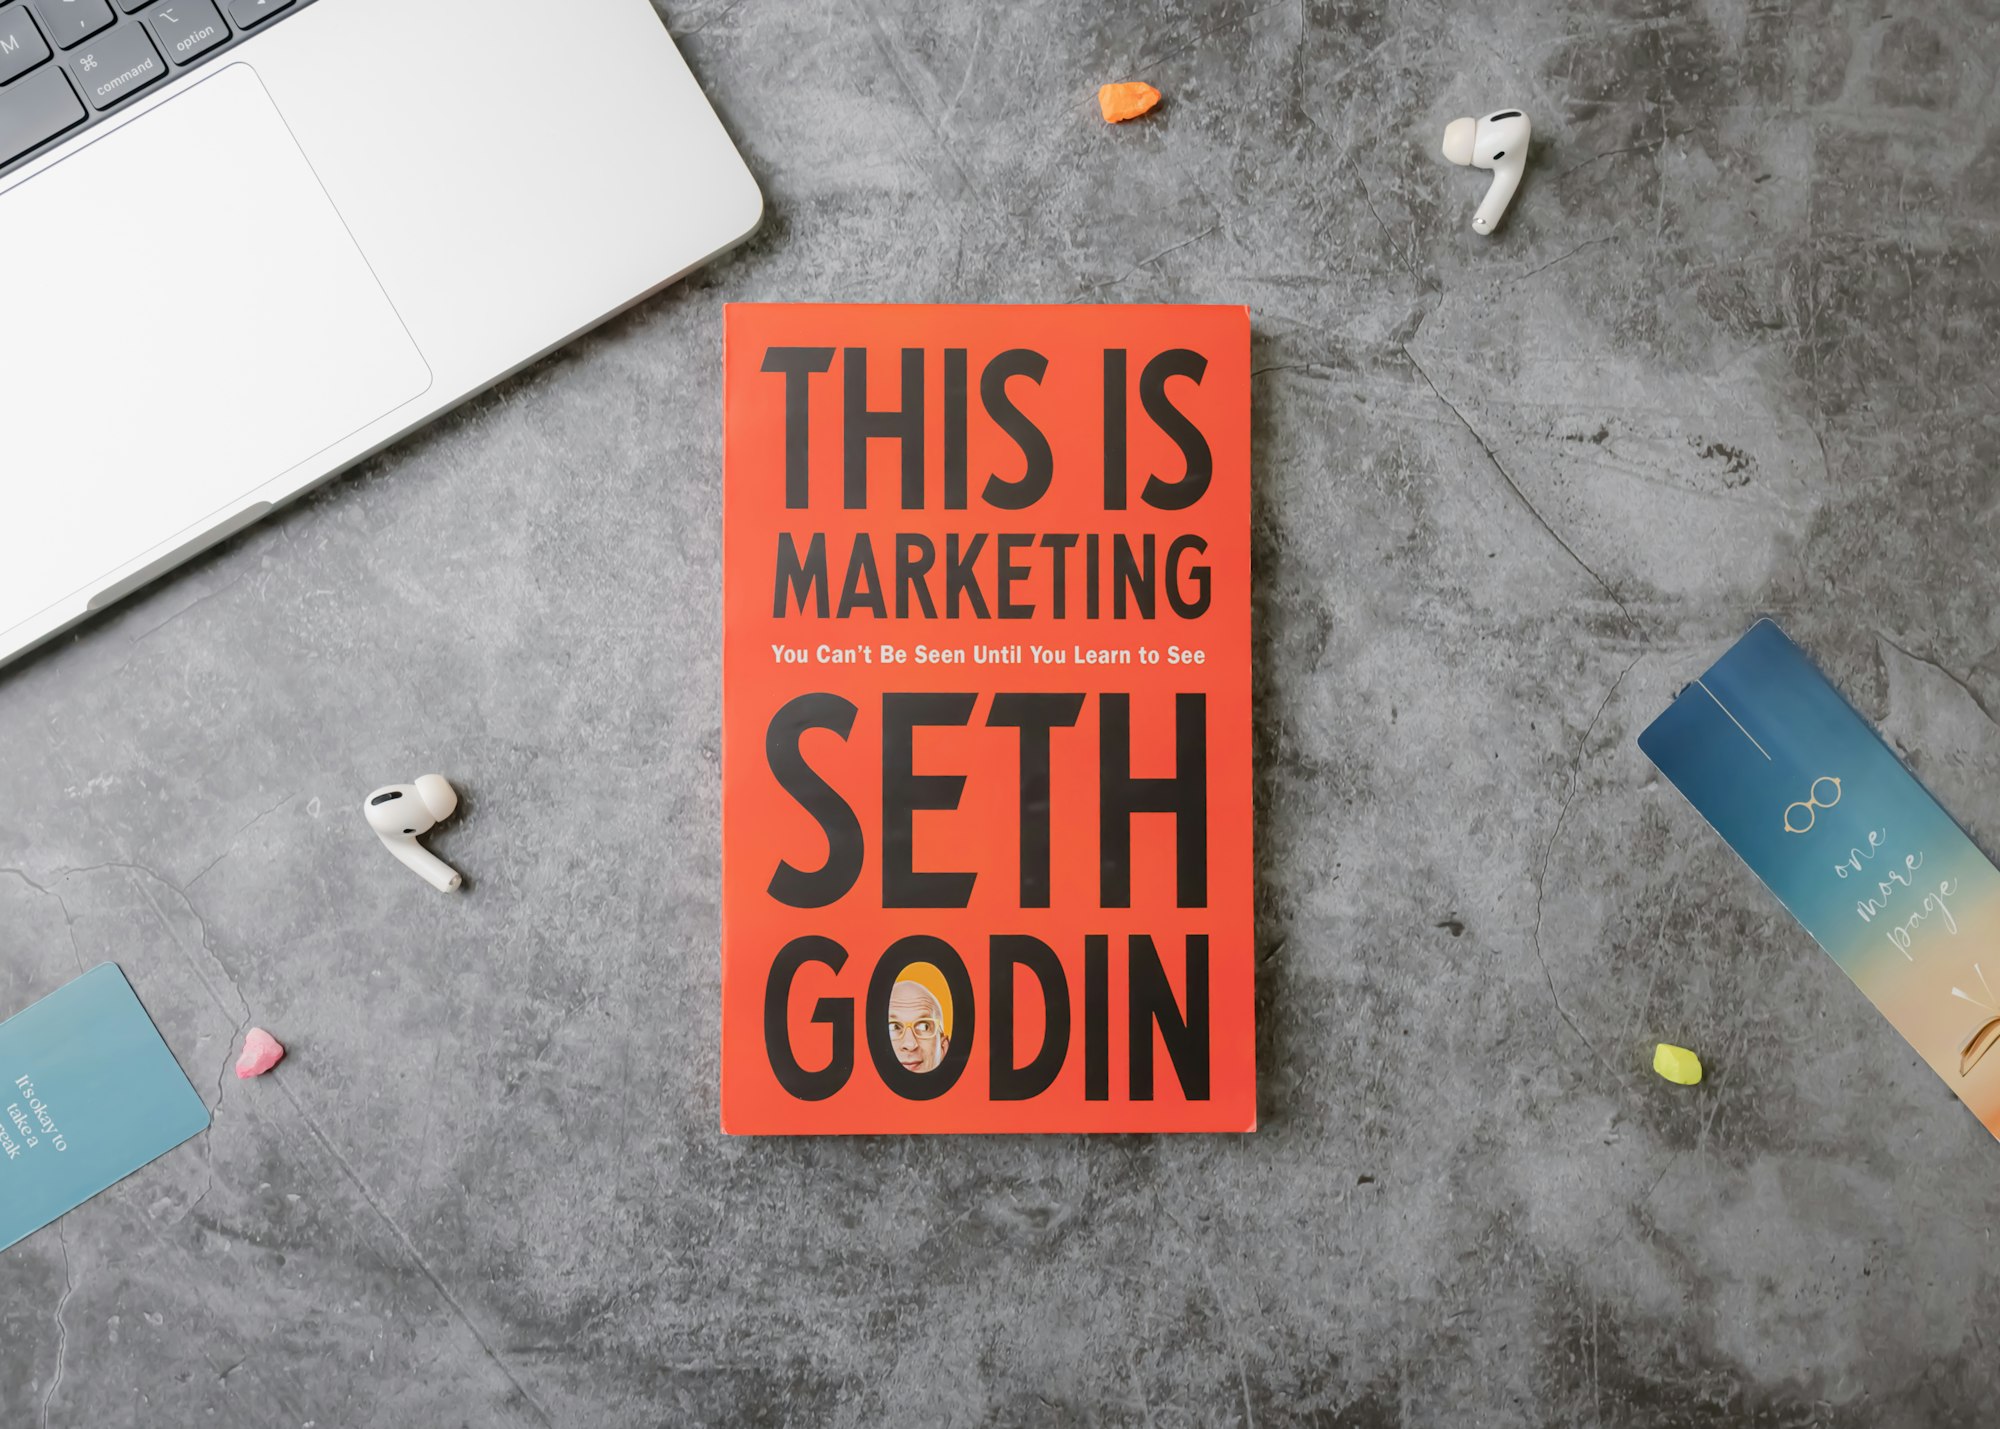 This Is Marketing argues that marketing success in today’s world comes from focusing more on the needs, values, and desires of our target audience, rather than spamming as many people as possible with our message.